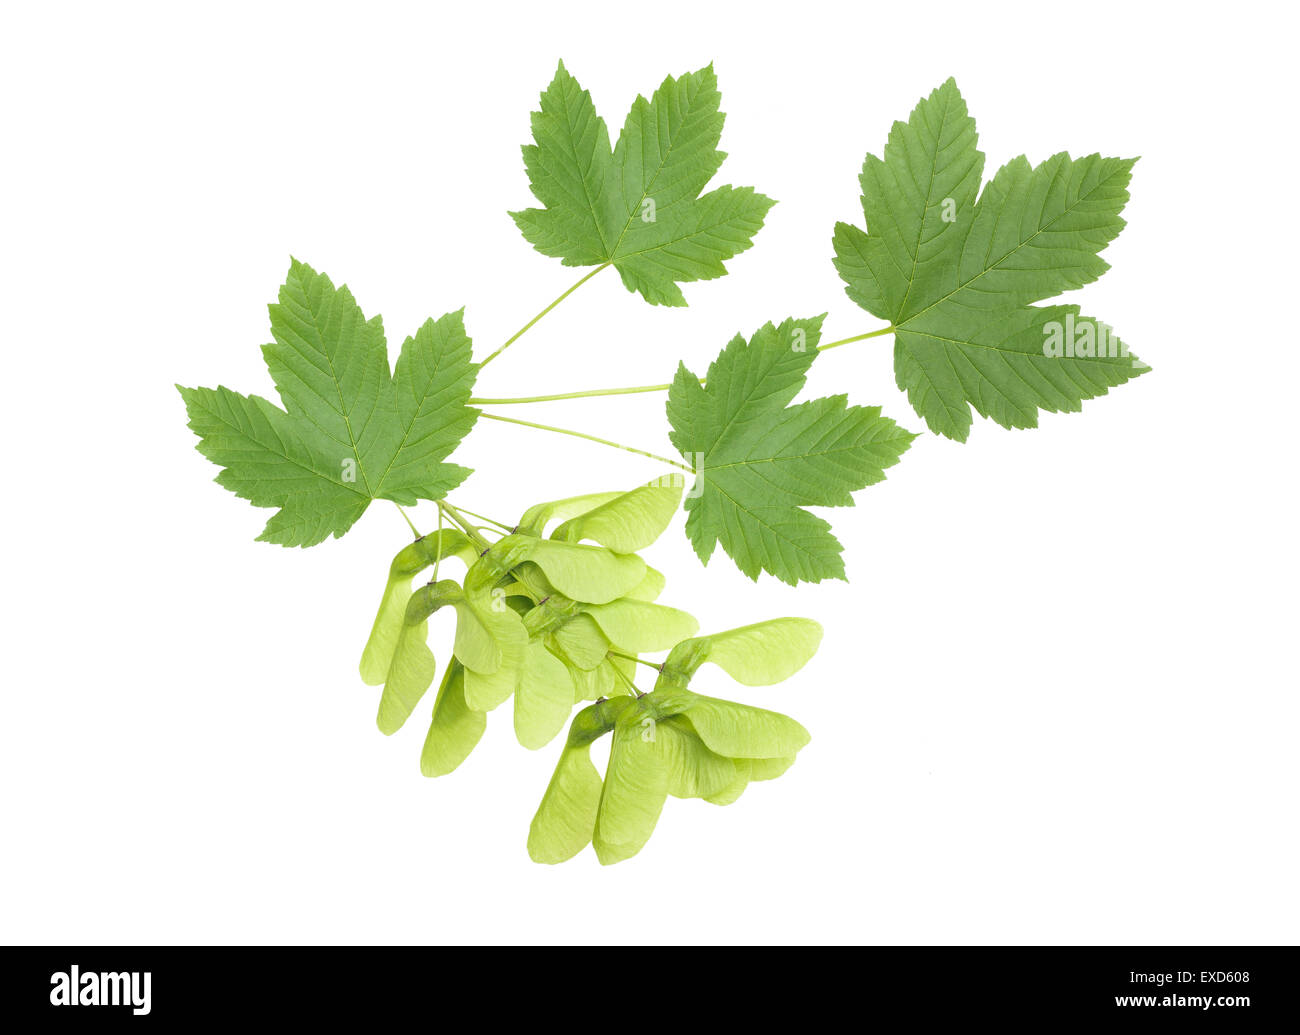 maple branch with leaves and samaras isolated on white background Stock Photo